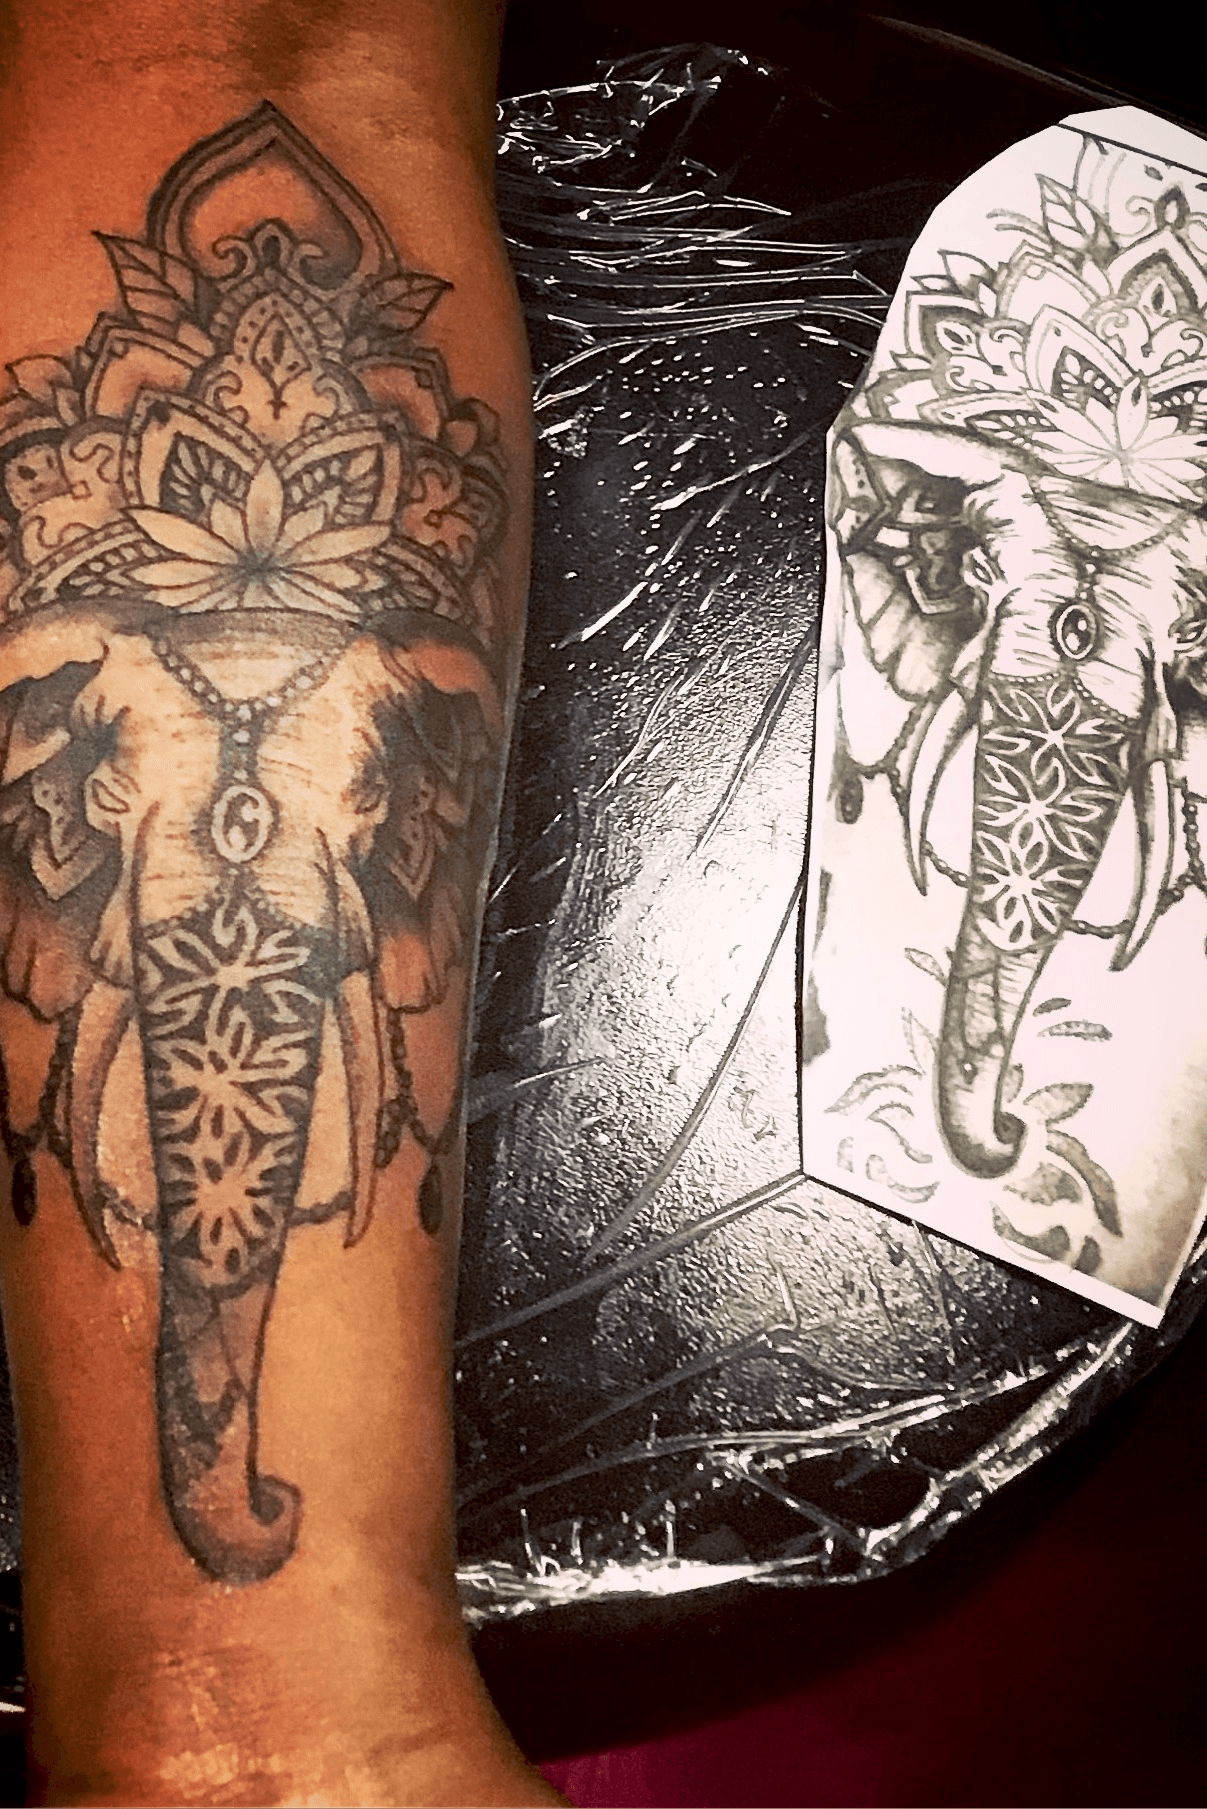  Whole forearm tattoo of the most amazing creature on the planet the long  nosed 2 eared elephant  elephant elephanttattoo animal  Instagram